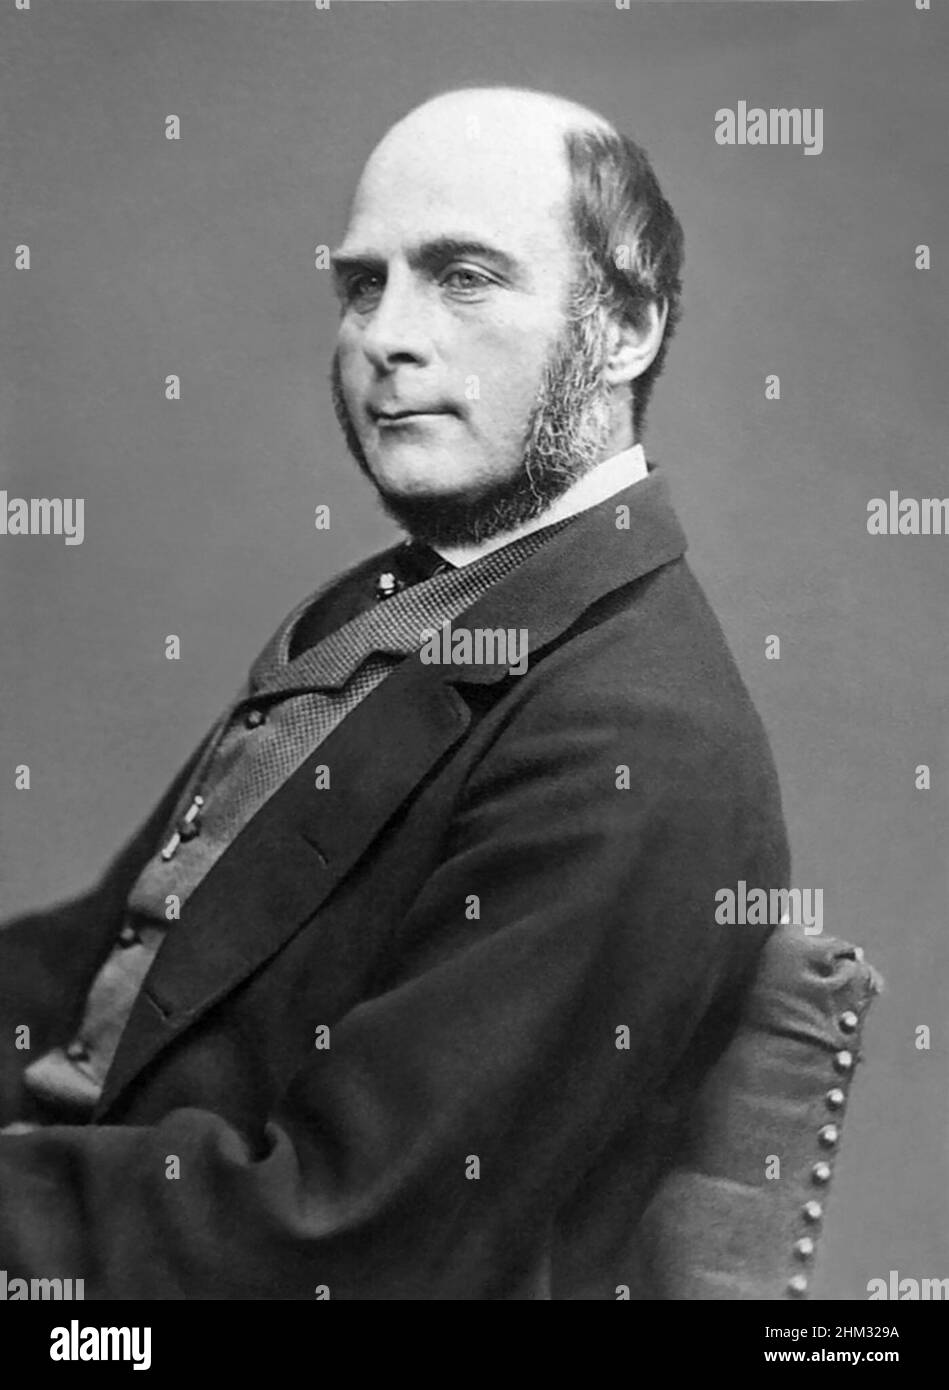 Sir Francis Galton, FRS FRAI (1822–1911), was an English Victorian era polymath: a statistician, sociologist, psychologist, anthropologist, tropical explorer, geographer, inventor, meteorologist, proto-geneticist, psychometrician and a proponent of social Darwinism, eugenics and scientific racism. Stock Photo